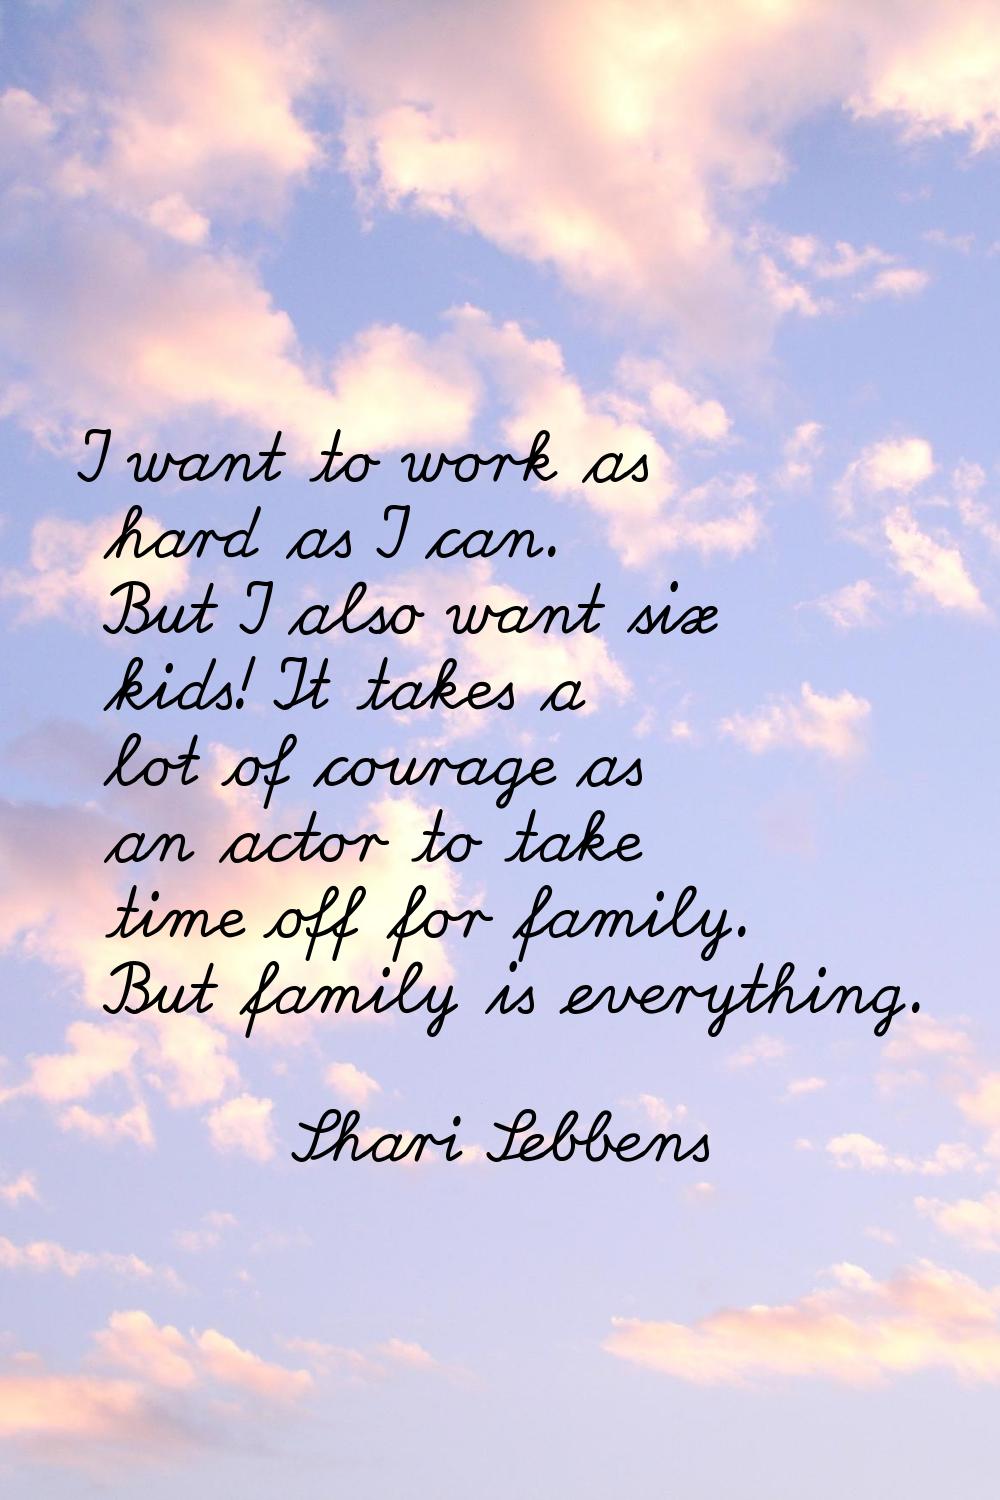 I want to work as hard as I can. But I also want six kids! It takes a lot of courage as an actor to